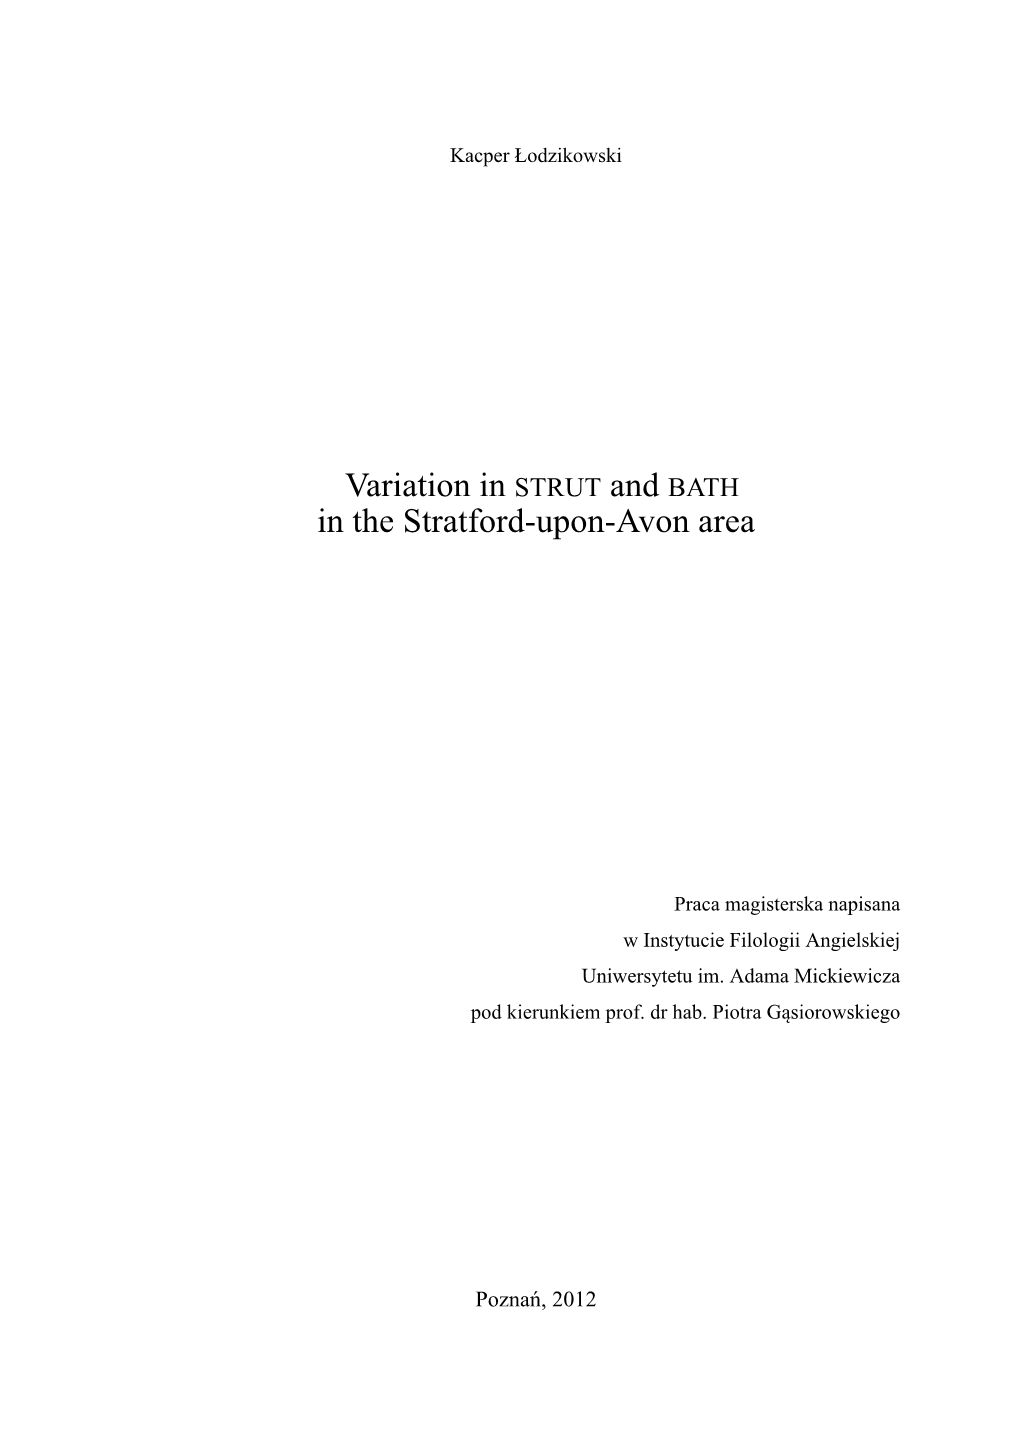 Variation in STRUT and BATH in the Stratford-Upon-Avon Area